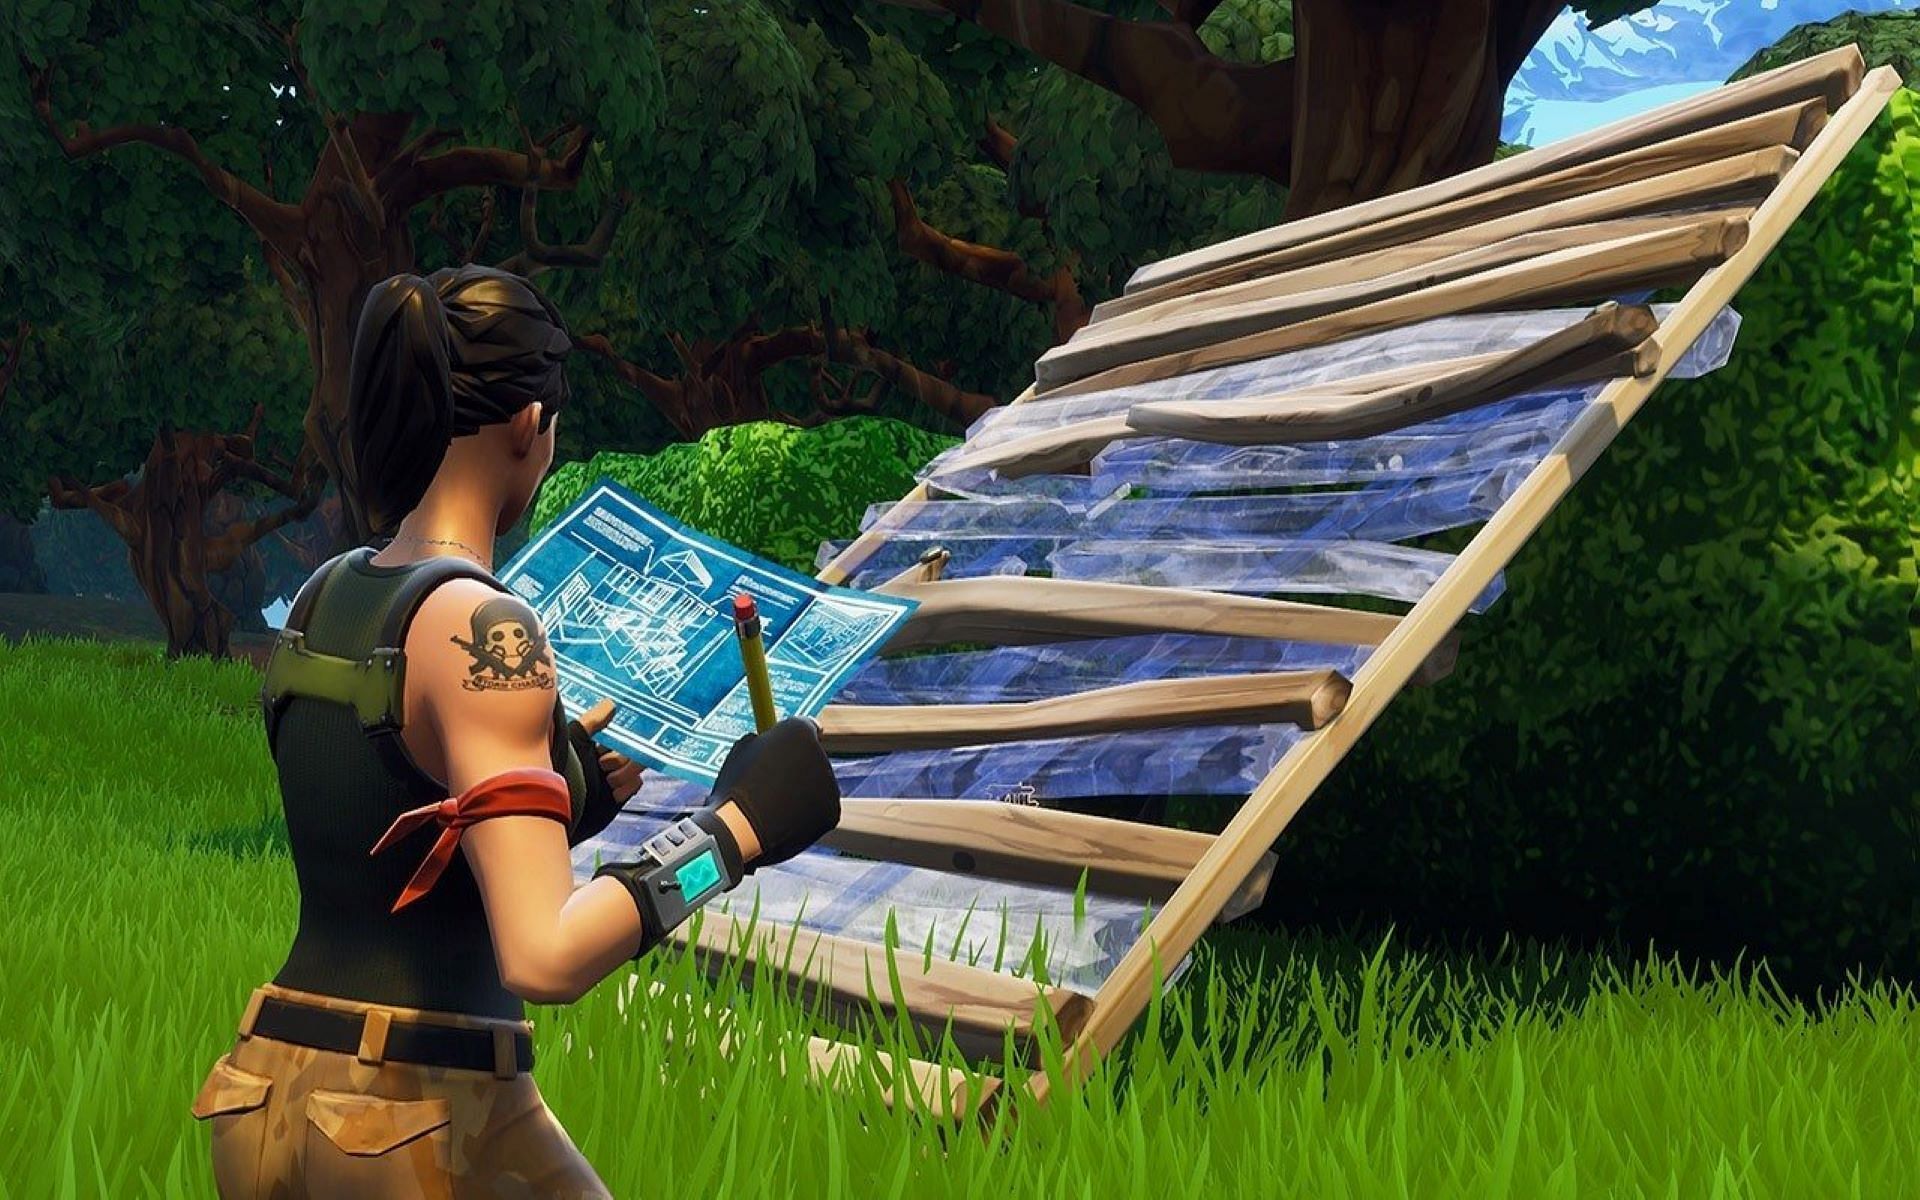 Using Macros for Fortnite edit builds is considered hacking (Image via Epic Games)